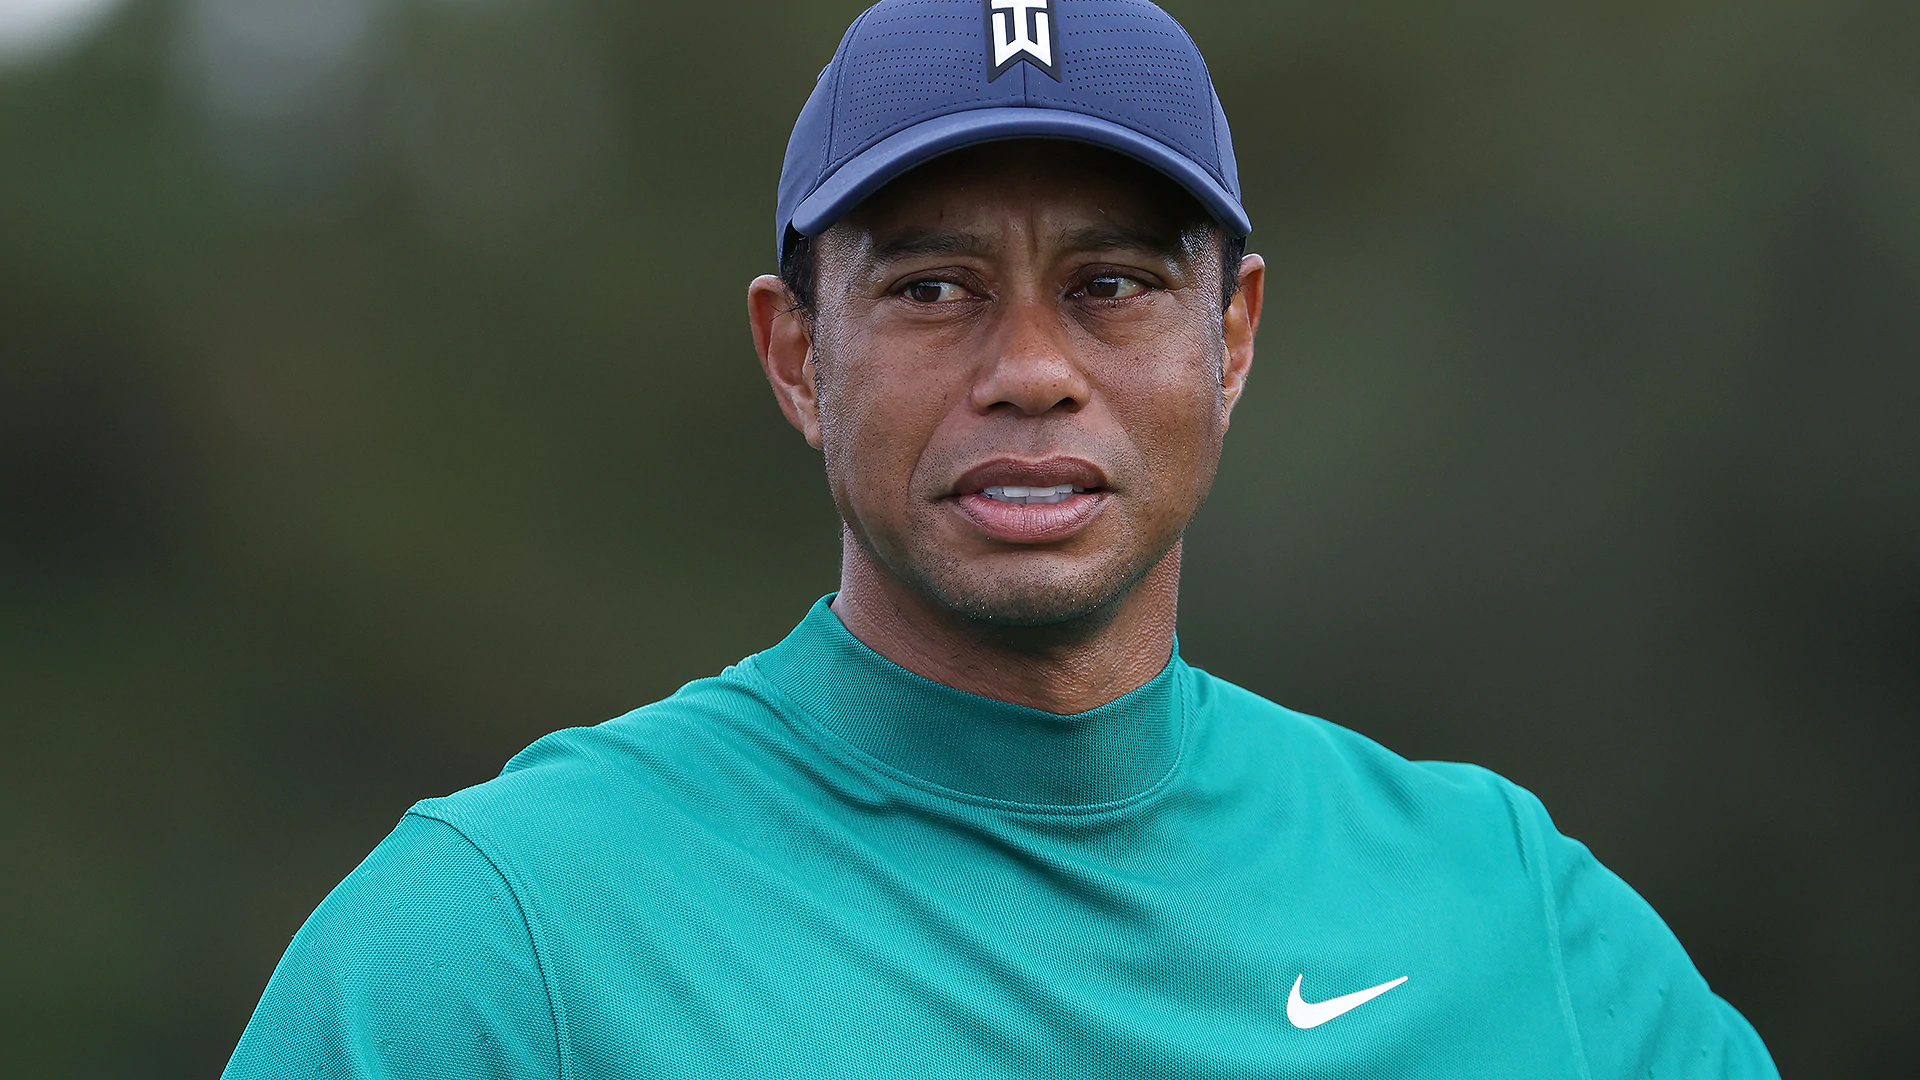 Jack Nicklaus, Gary Player describe teary, emotional Tiger Woods at Champions Dinner